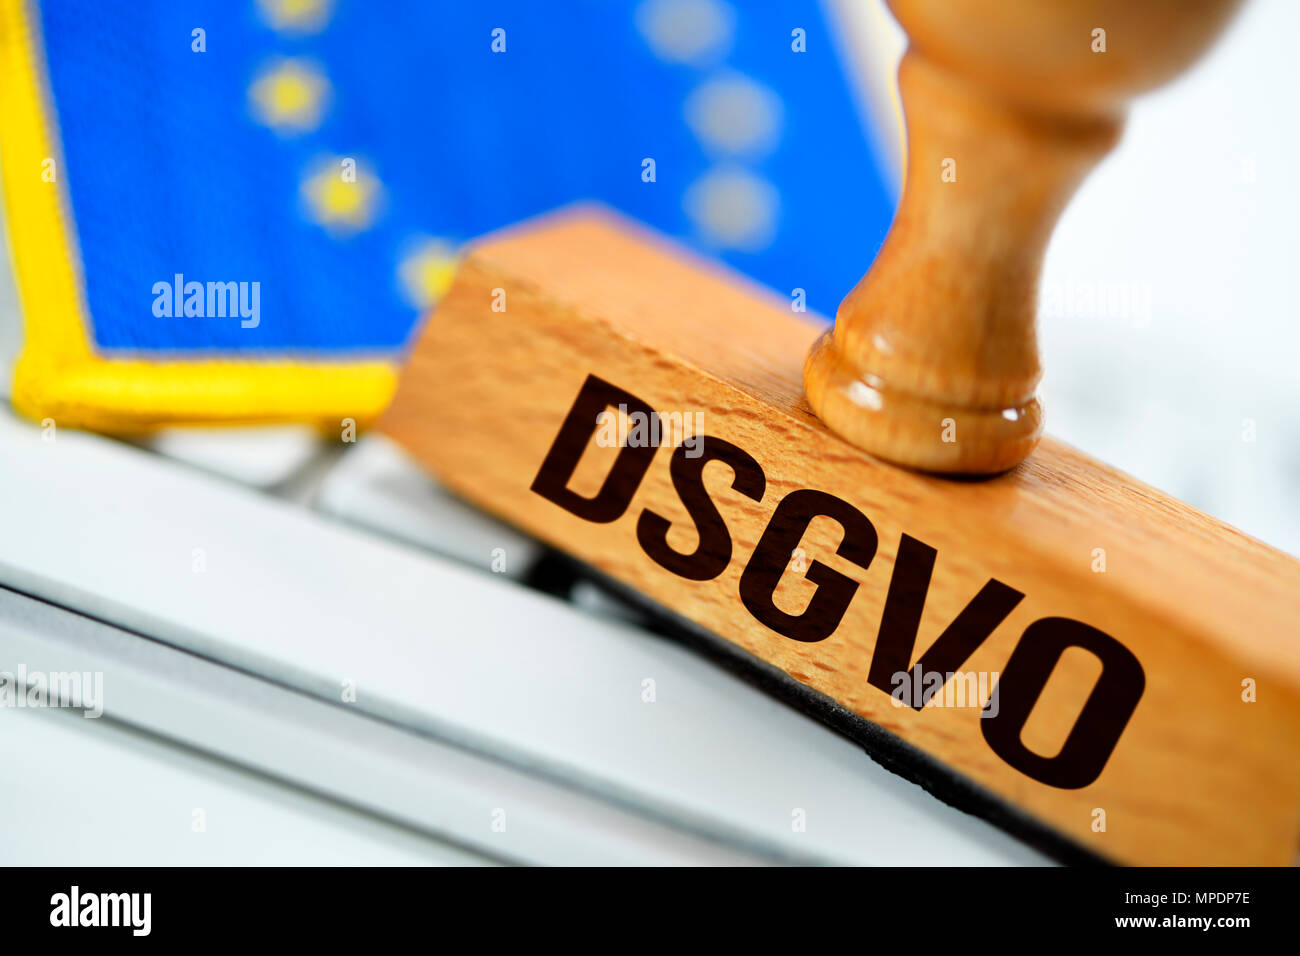 DSGVO stamp and EU flag Stock Photo